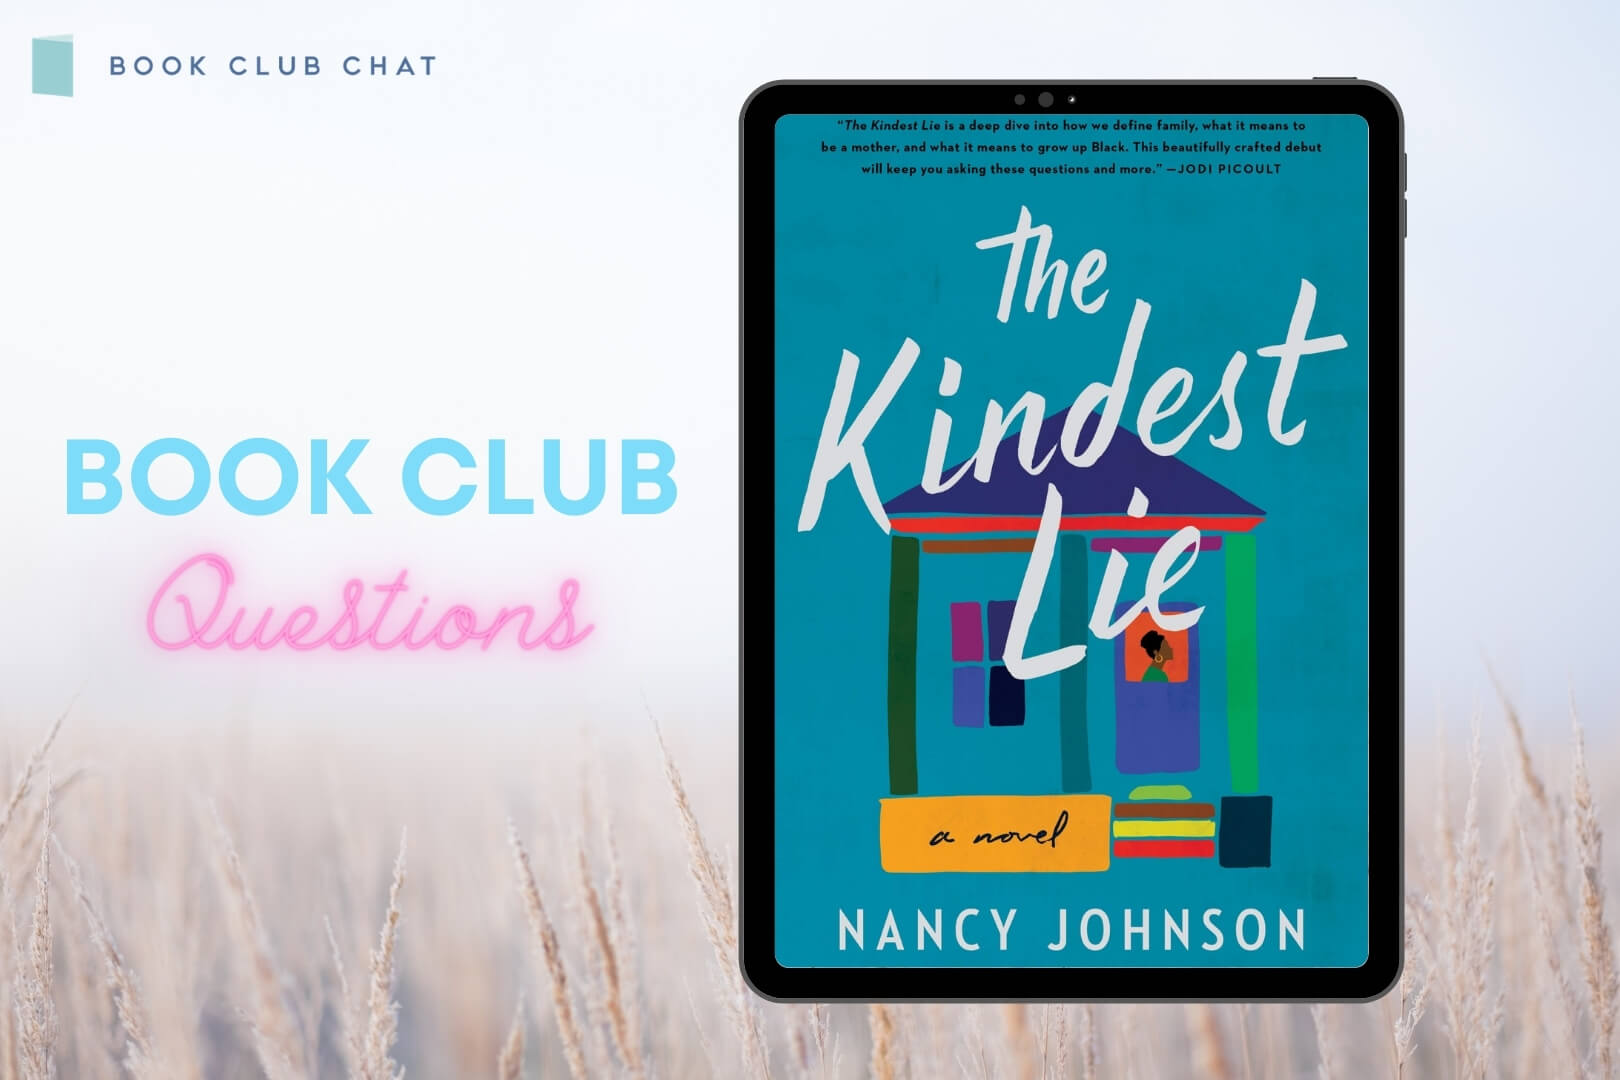 Book Club Questions for The Kindest Lie by Nancy Johnson